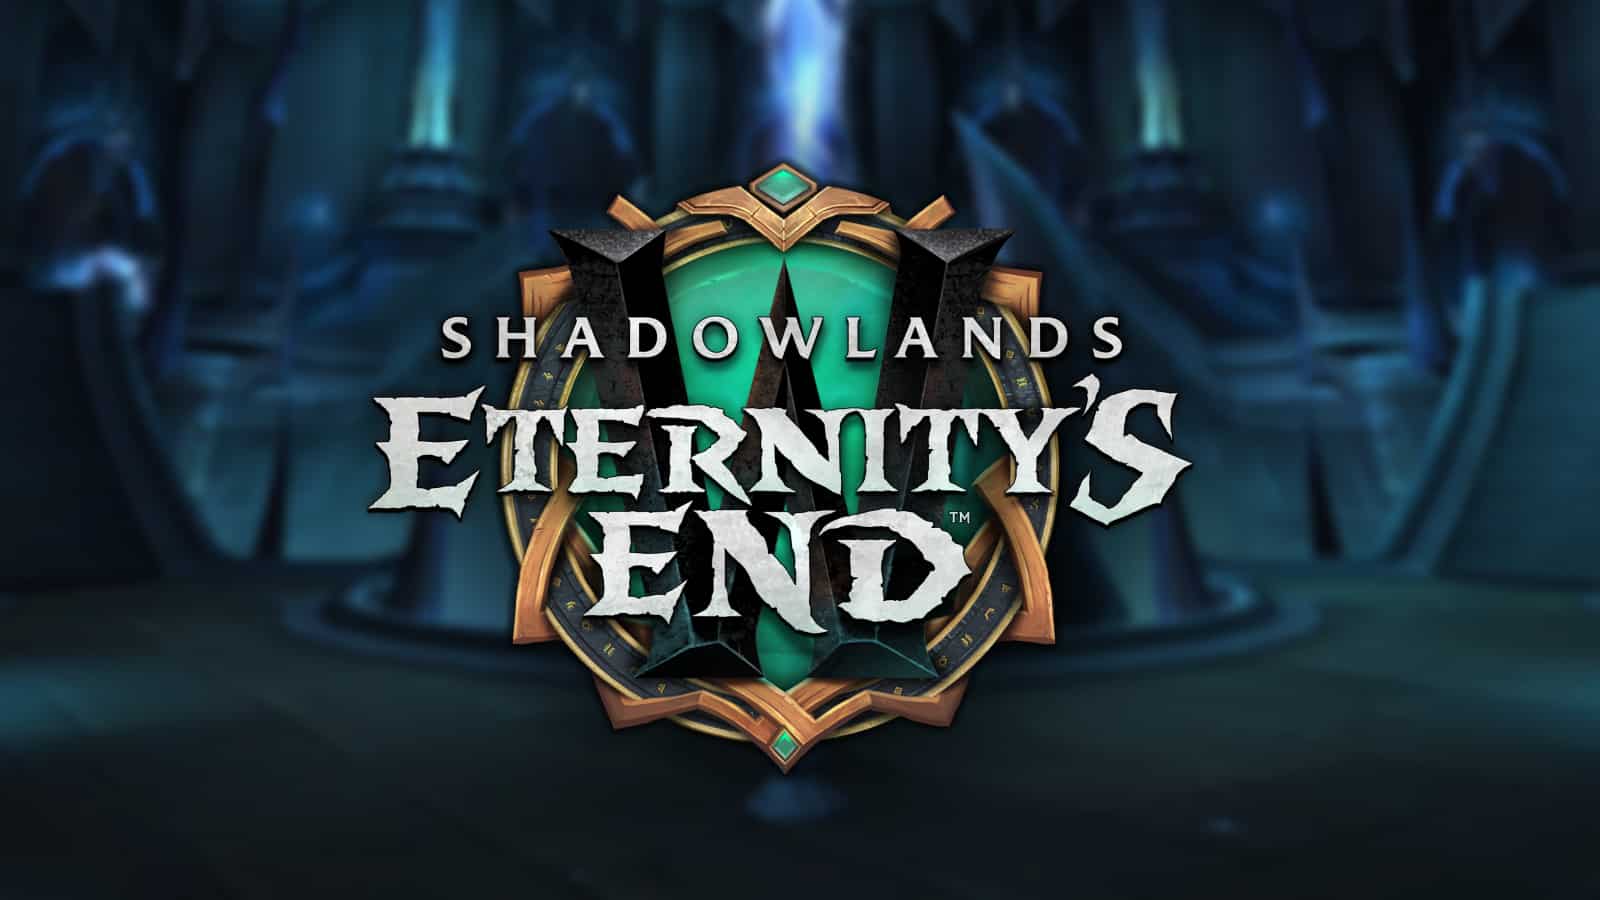 world of warcraft wow shadowlands 9.2 eternity's end logo on torghast background